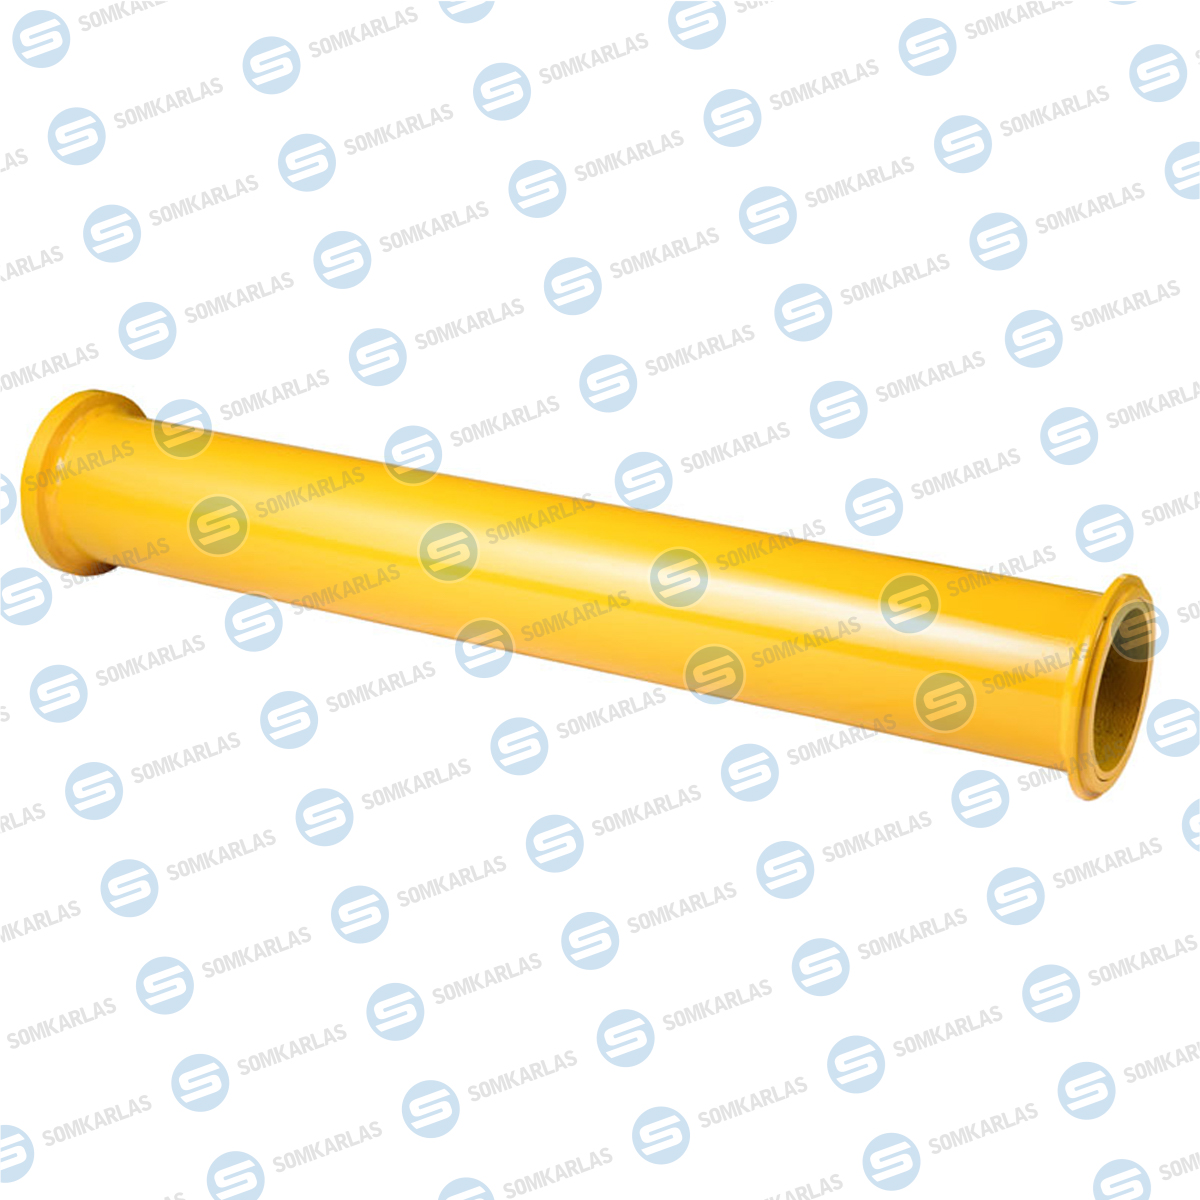 SOM20571 - PM DELIVERY PIPE 7,1  ZX125/5,5 x3000 - 